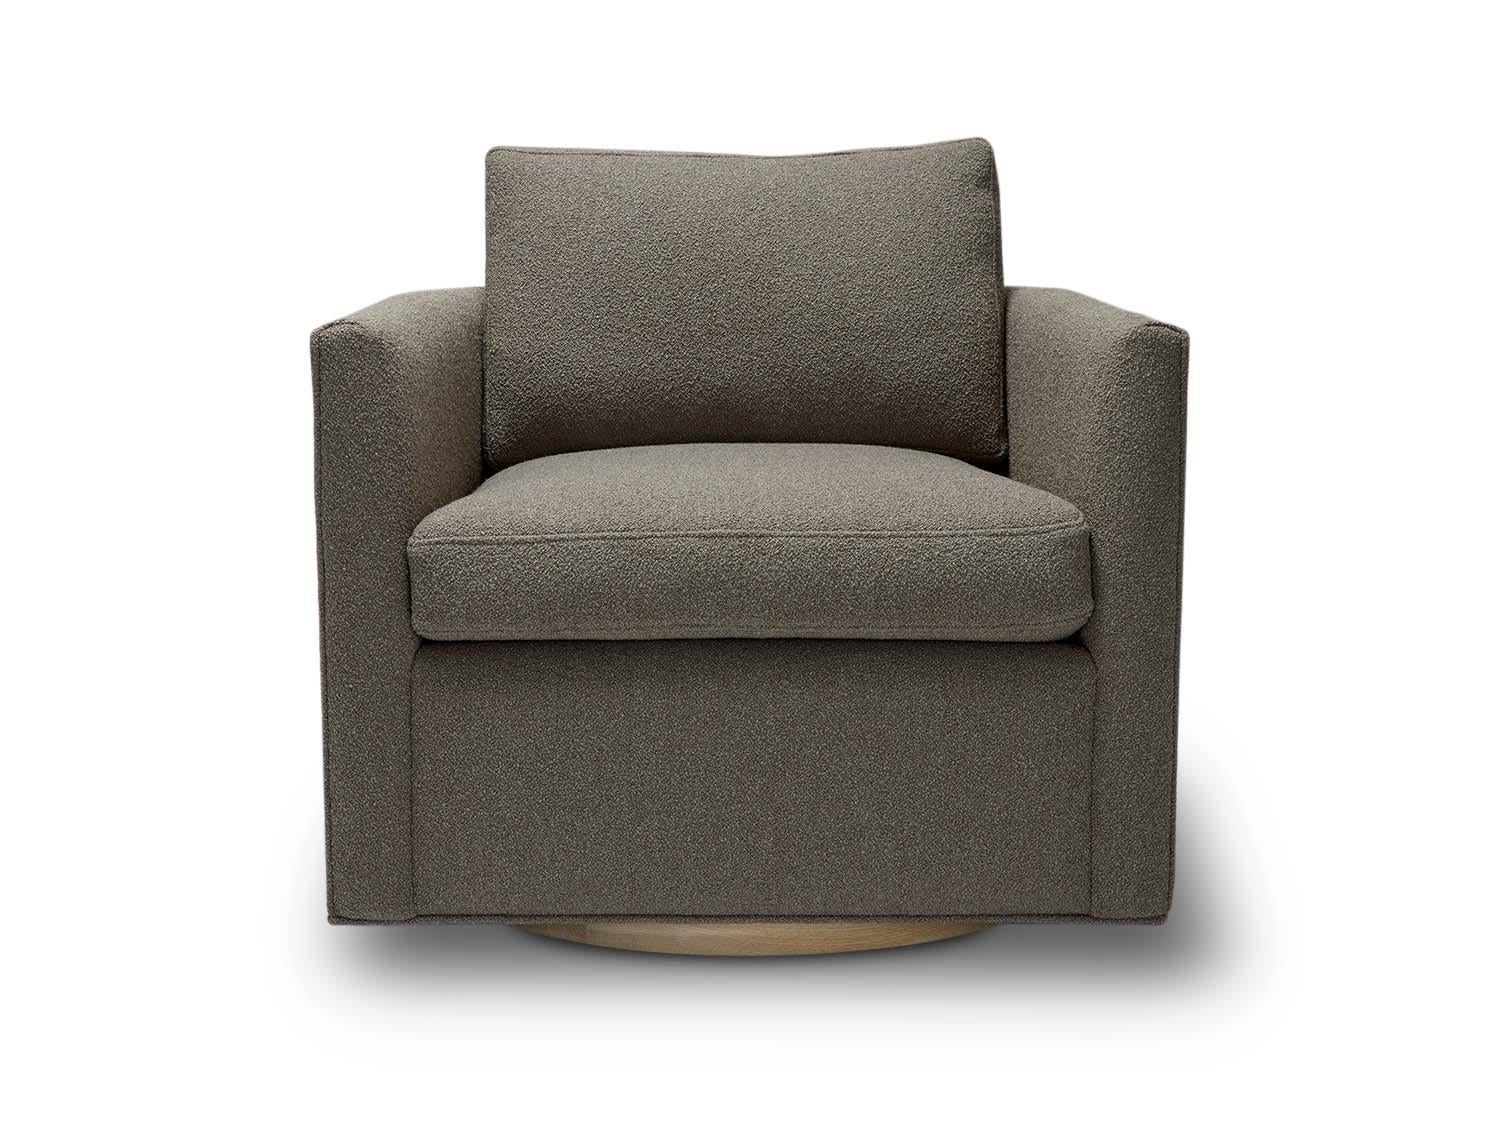 The curved back swivel chair is a tuxedo style lounge chair with curved corners and a metal base. The chair features down-wrapped, removable seat and back cushions.

The Lawson-Fenning Collection is designed and handmade in Los Angeles,